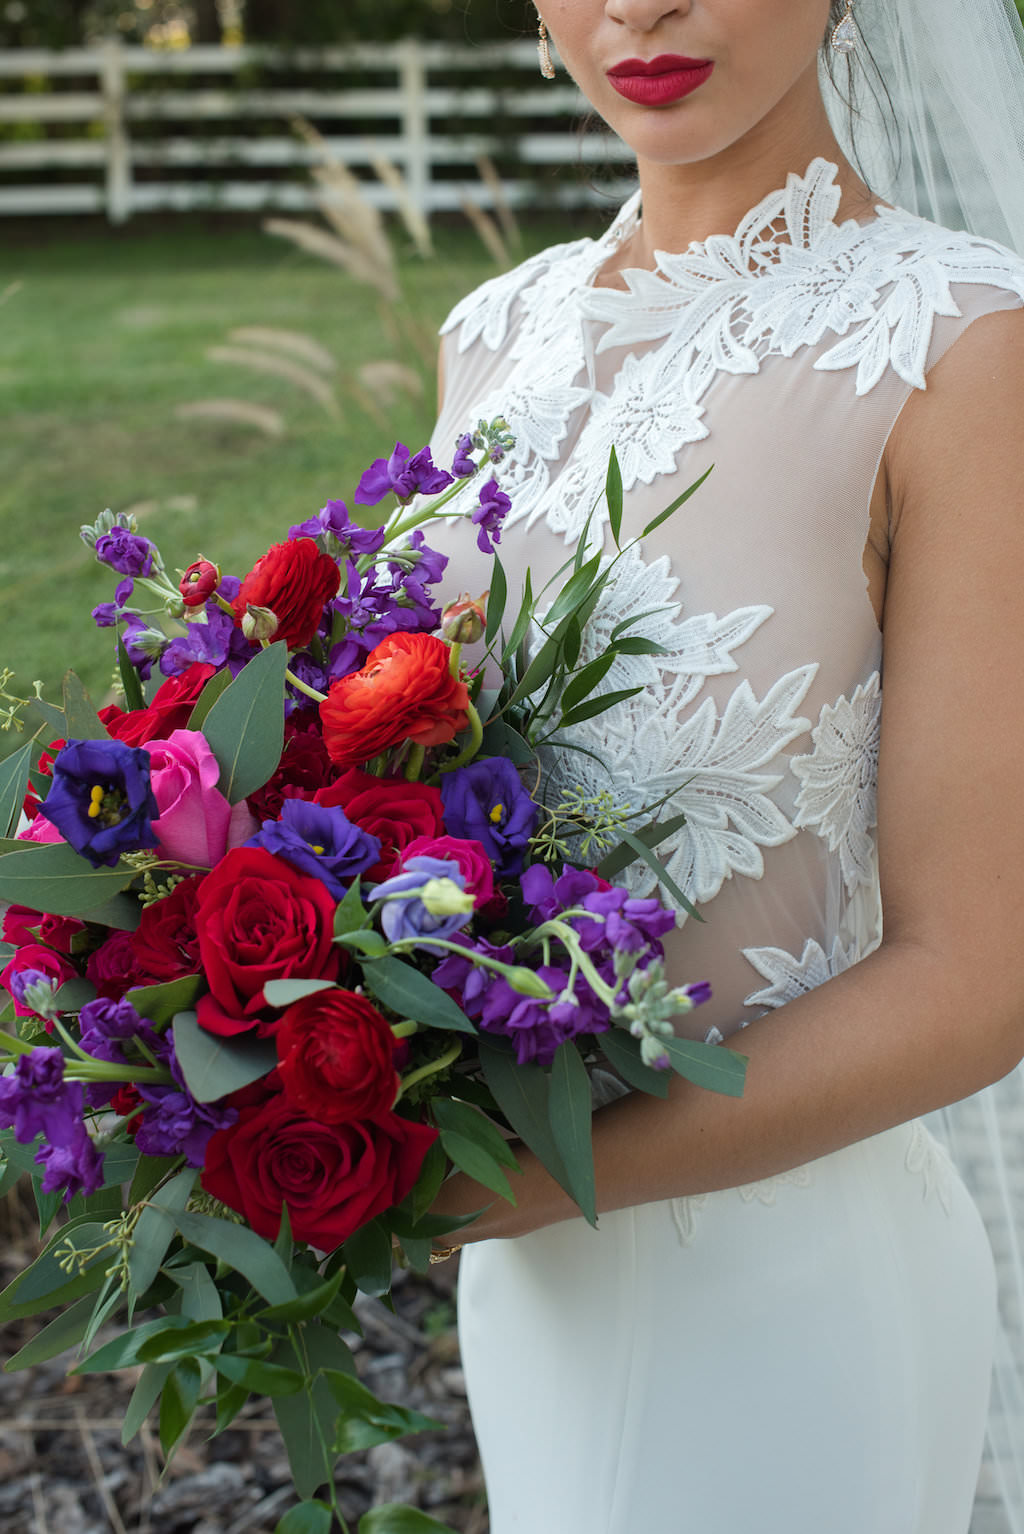 Outdoor Wedding Portrait with Red, Purple, and Greenery Bouquet from Tampa Florist Northside Florist, in Daalarna Couture Illusion Lace Wedding Dress from The Bride Tampa | Caroline & Evan Photography